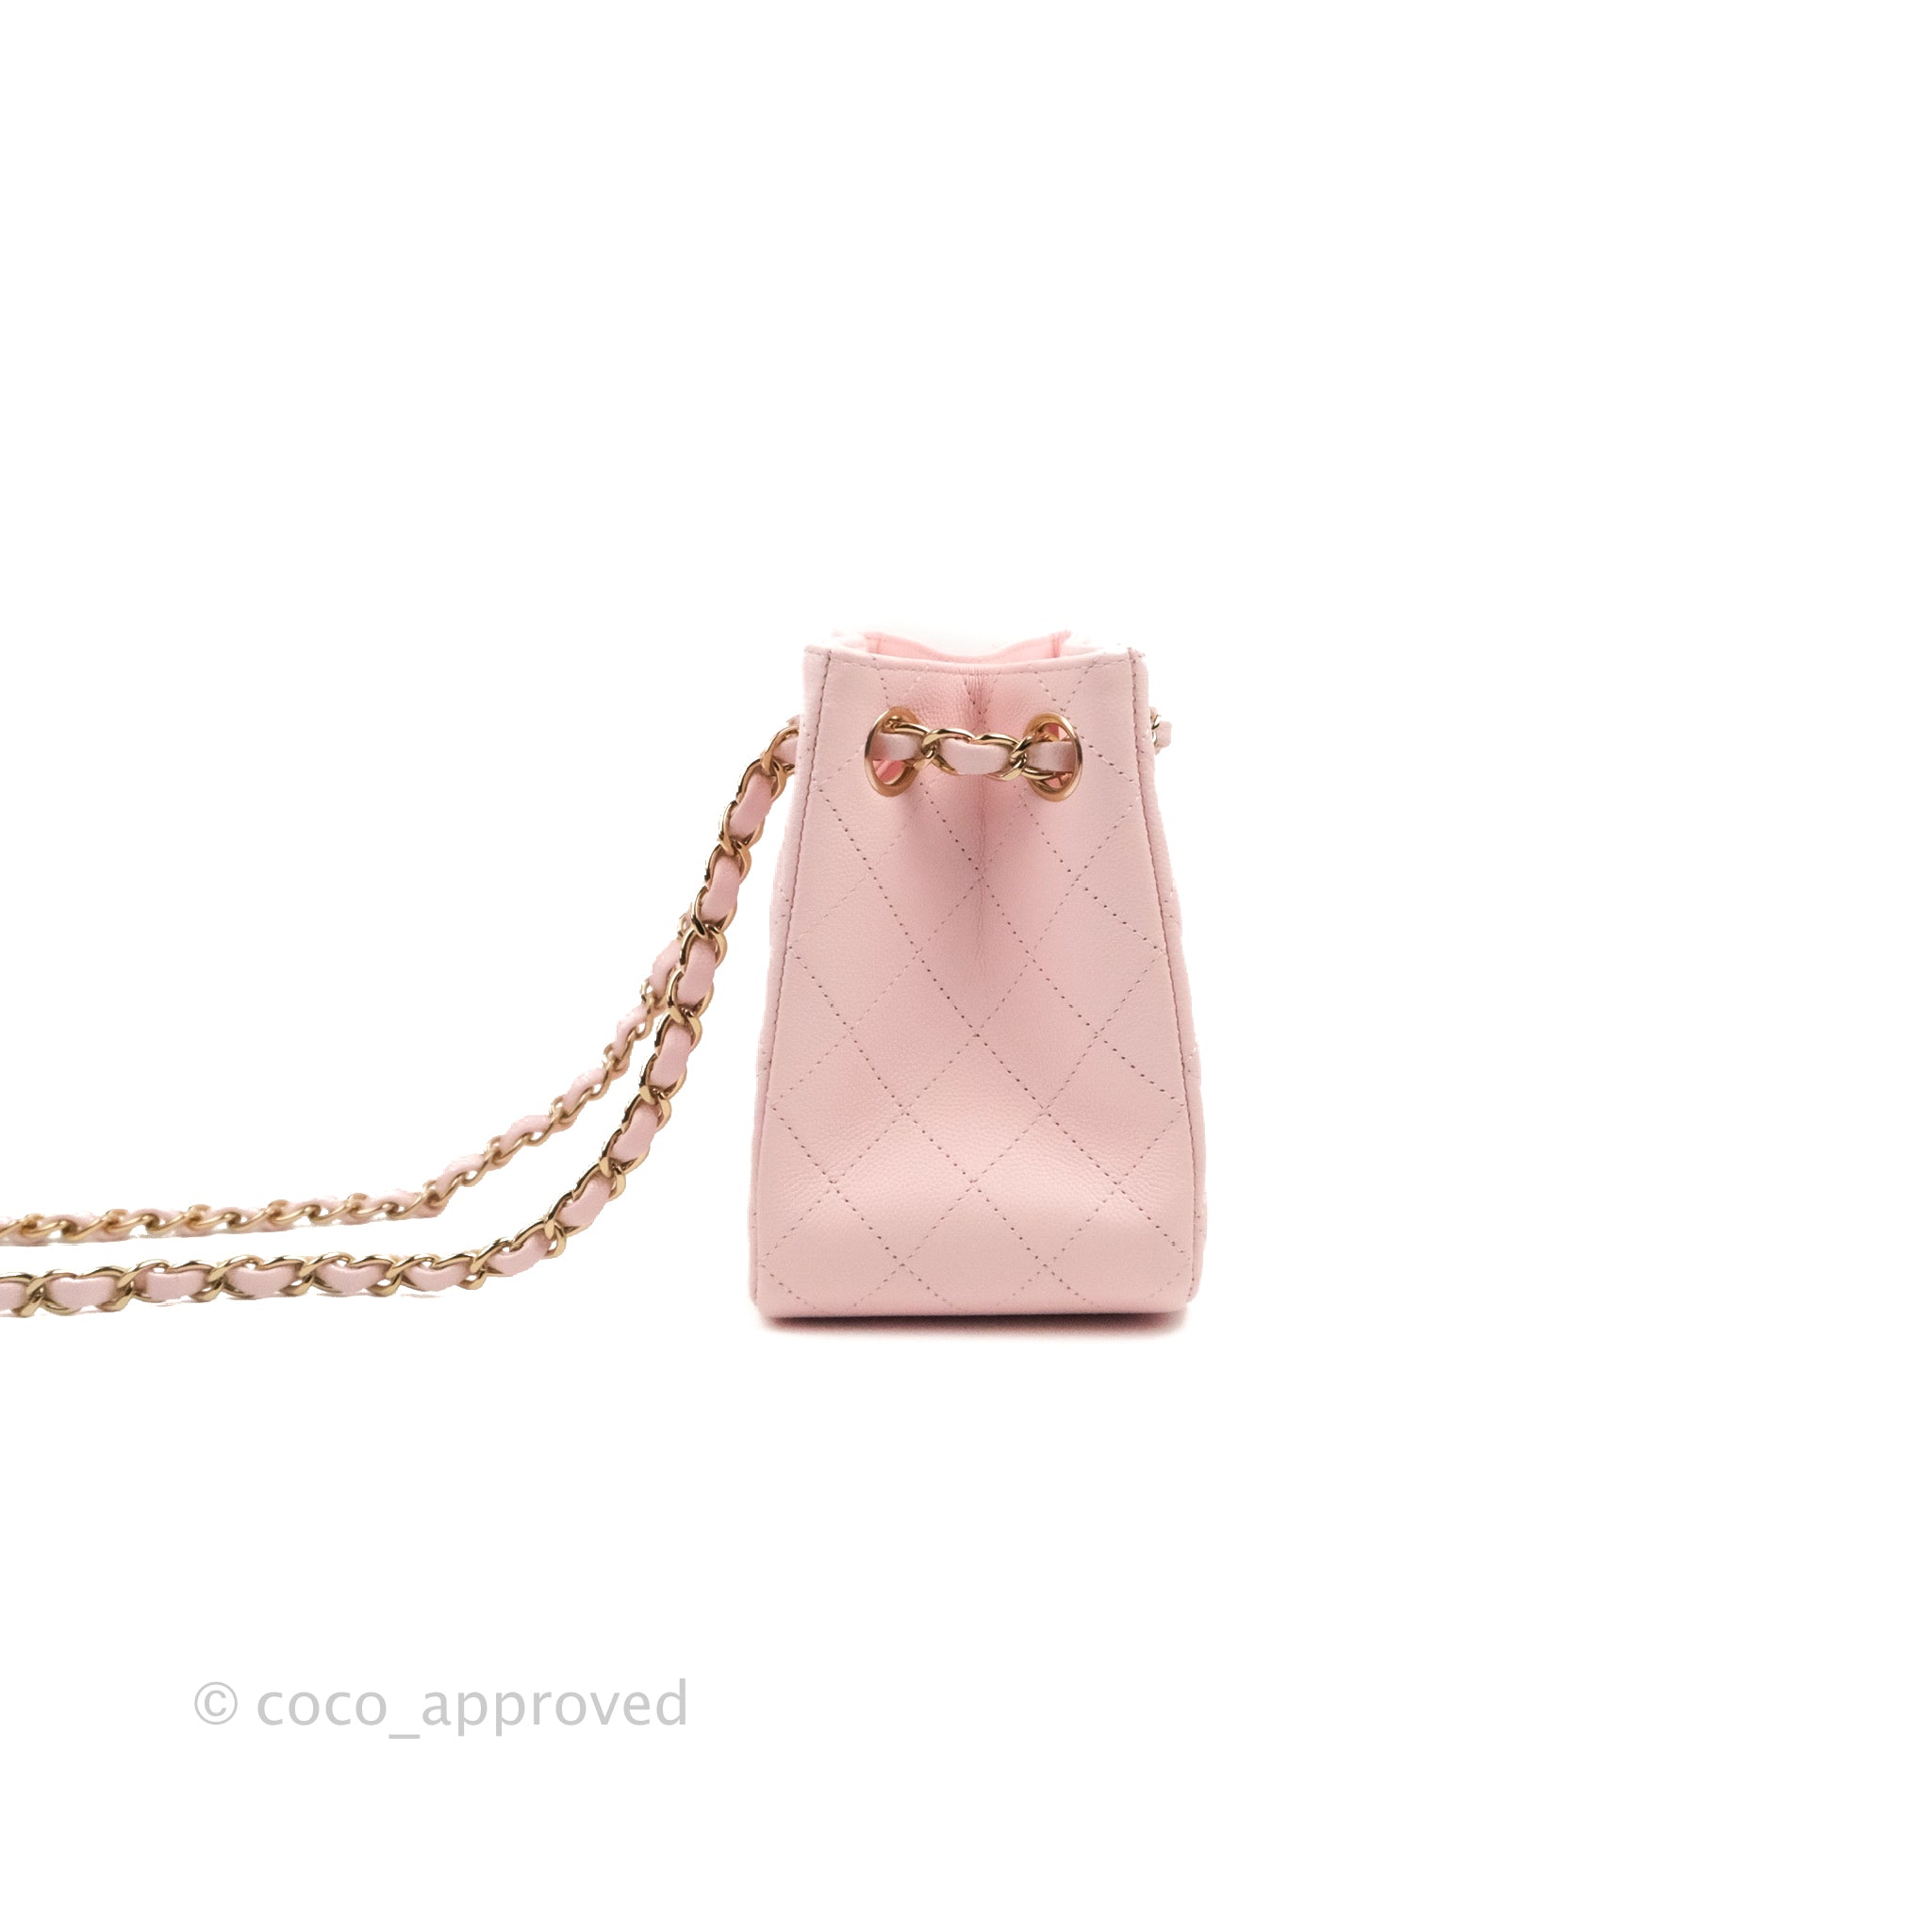 Sold at Auction: Baby Pink Louis Vuitton Branded Handbag with Coin Purse